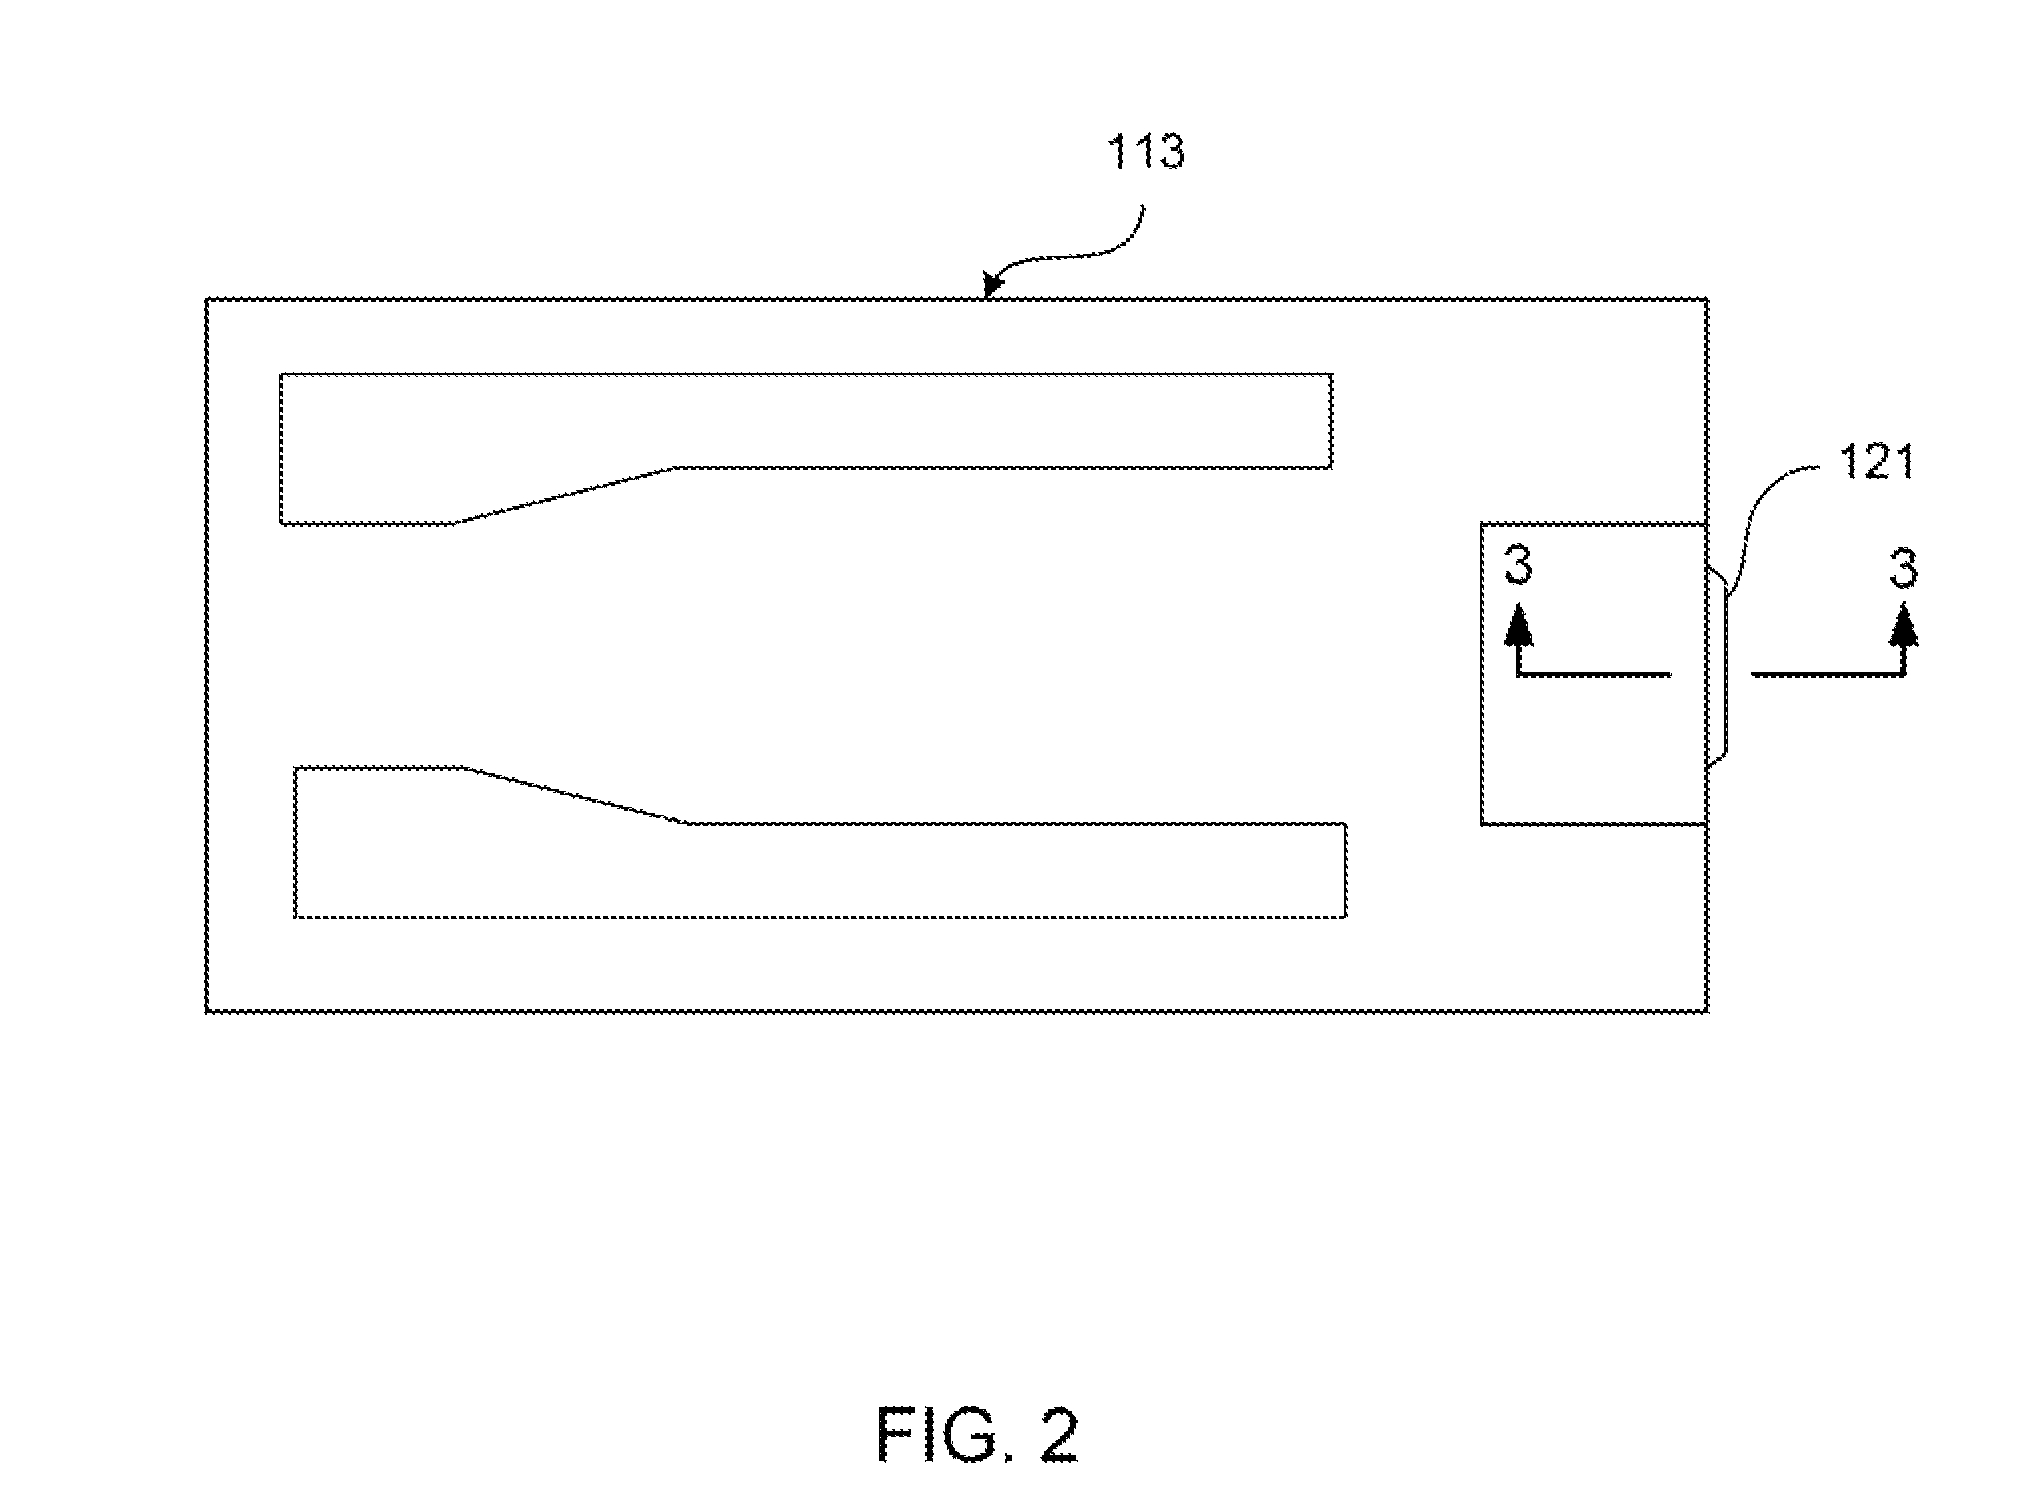 Perpendicular write head with independent trailing shield designs